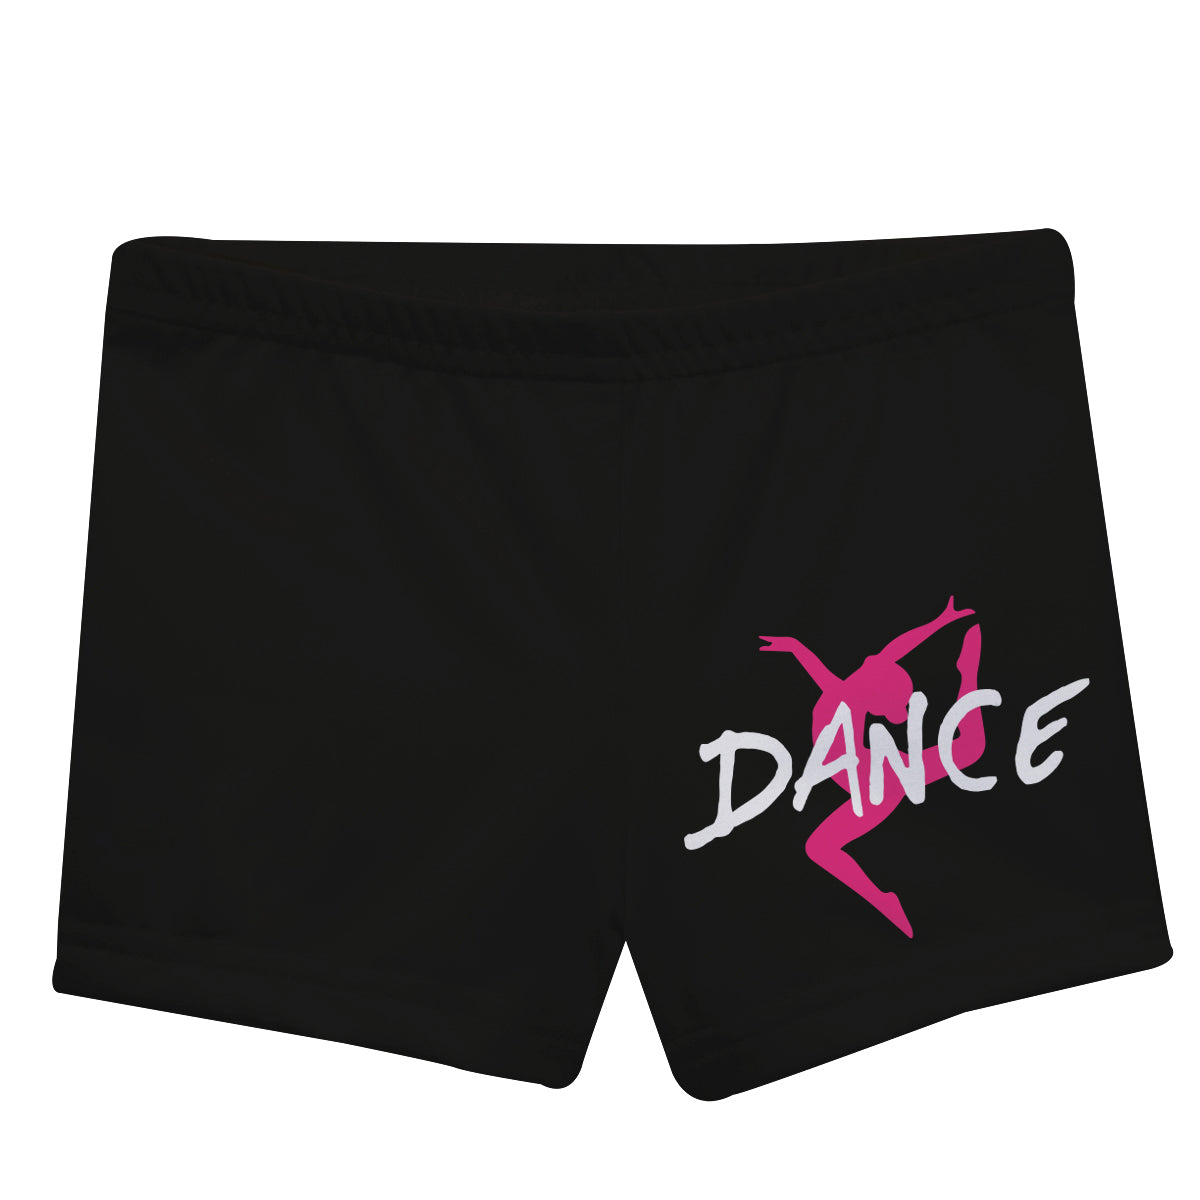 Black and pink dance girls shorts with monogram - Wimziy&Co.